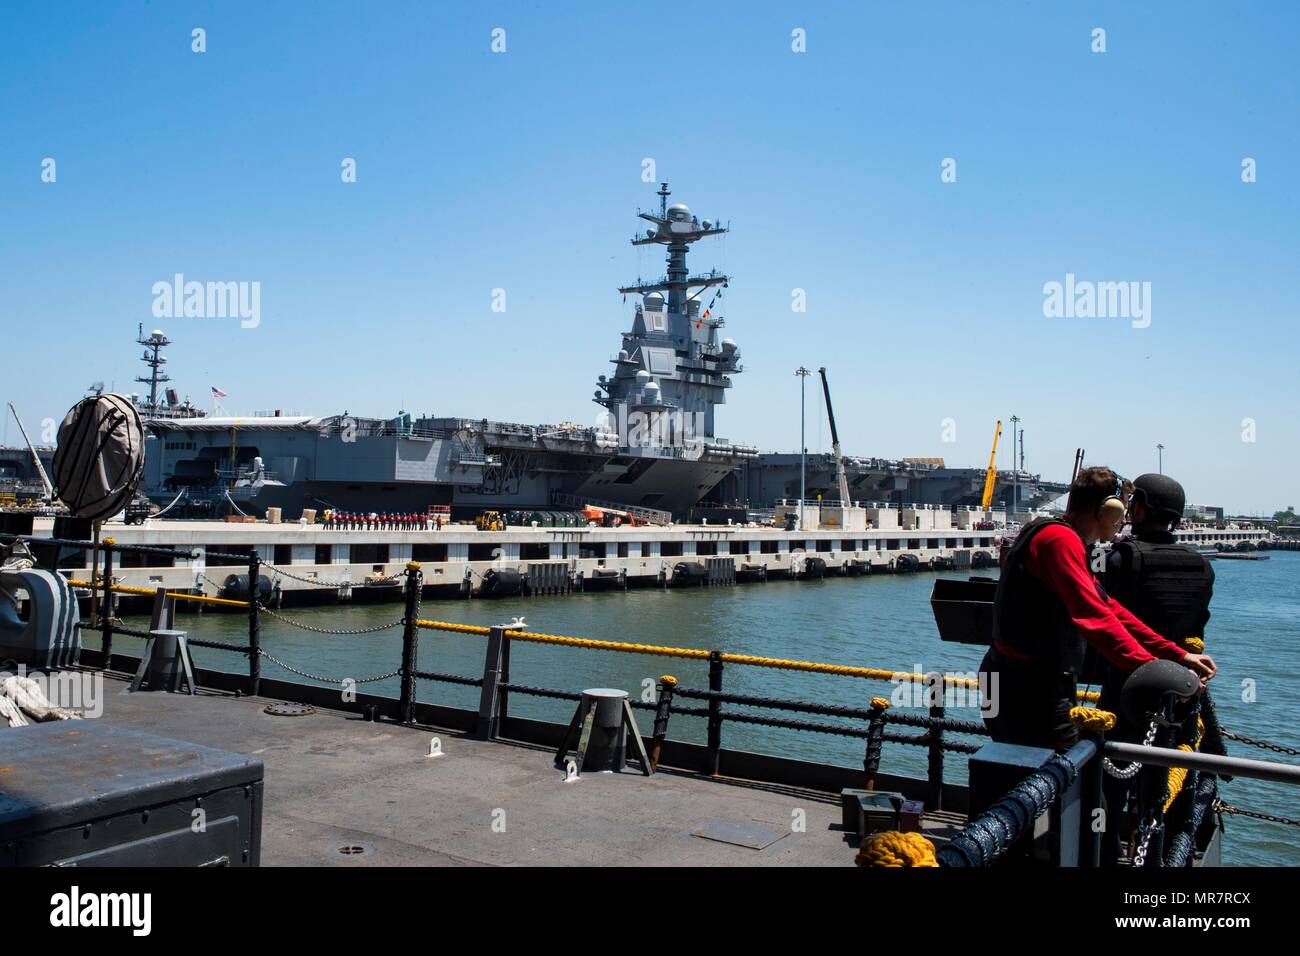 170519-N-QN175-020 NORFOLK, VA. (May 19, 2017) Sailors stand watch on the fantail of the aircraft carrier USS Dwight D. Eisenhower (CVN 69) as the ship gets underway and pulls away from a pier at Naval Station Norfolk. USS Gerald R. Ford (CVN 78) remains moored at the pier.  Dwight D. Eisenhower got underway to conduct engineering drills as part of the sustainment phase of the Optimized Fleet Response Plan. (U.S. Navy photo by Mass Communication Specialist 3rd Class Dartez C. Williams/Released) Stock Photo